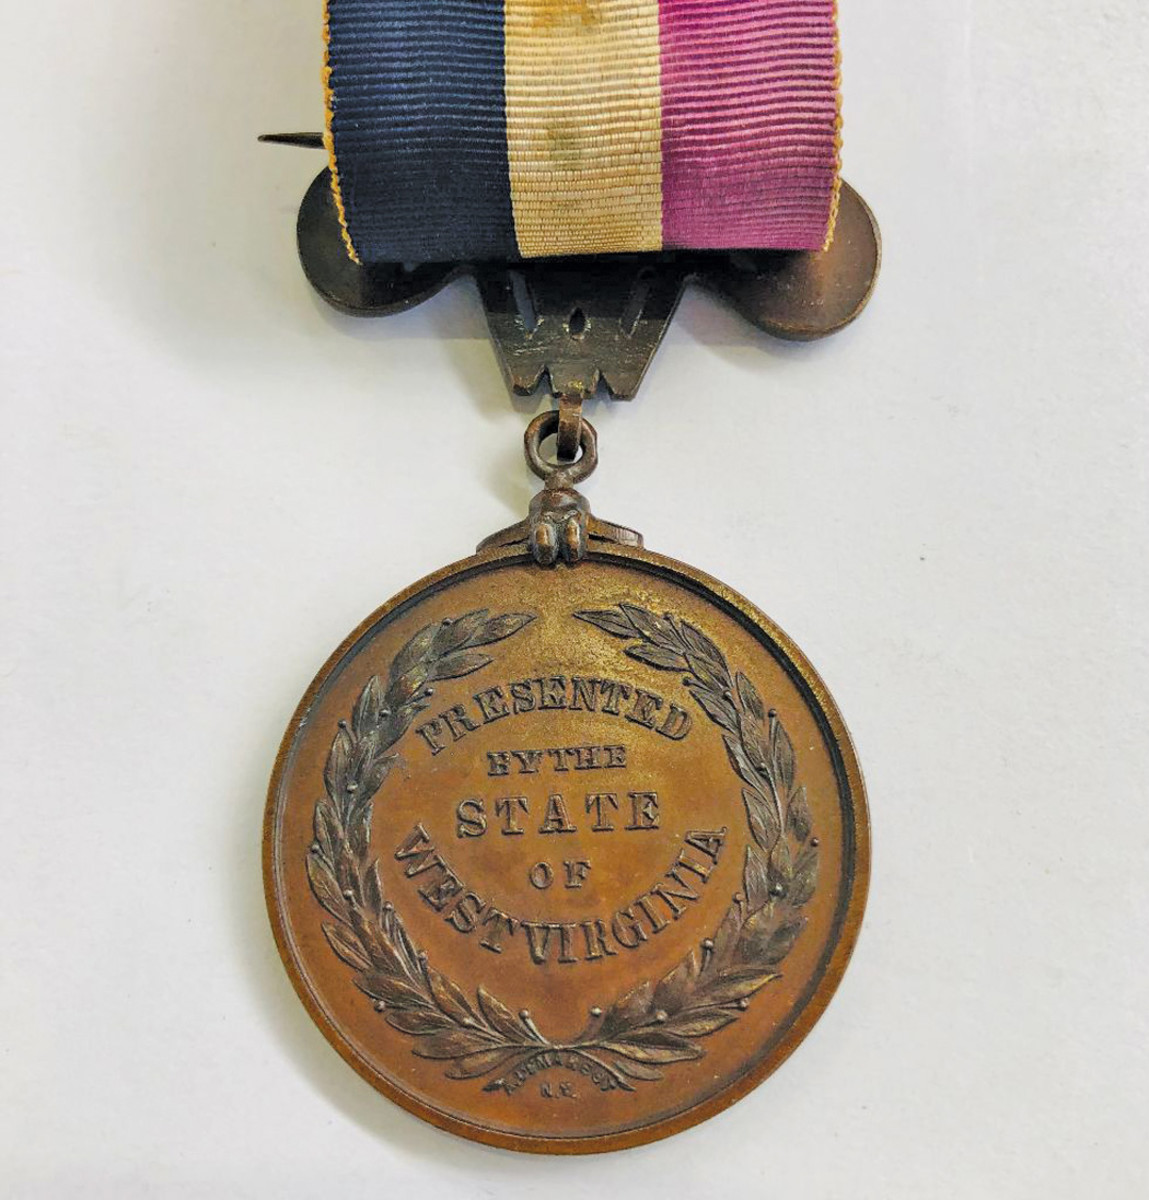 All three versions of the West Virginia Civil War medal had identical reverses and the maker hallmark A. Demarest, N.Y. below the tie in the wreath. W.V. medal images from the Robert Wilson collection